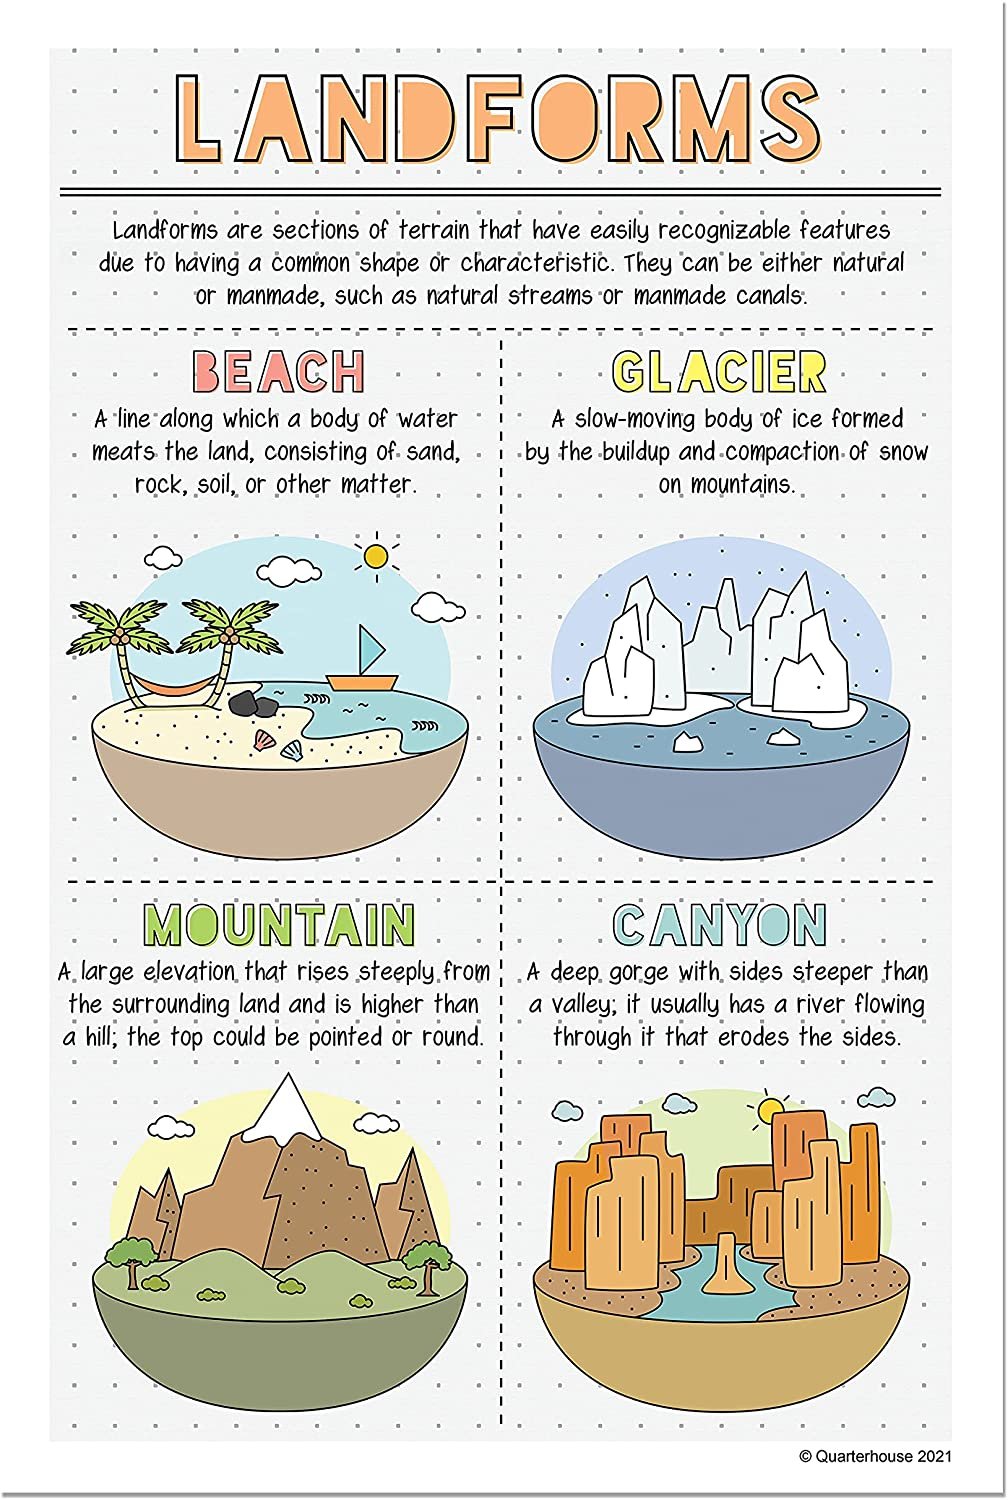 Quarterhouse Landforms and Habitats Geography Poster Set, Social Studies and Geography Classroom Learning Materials for K-12 Students and Teachers, Set of 6, 12 x 18 Inches, Extra Durable